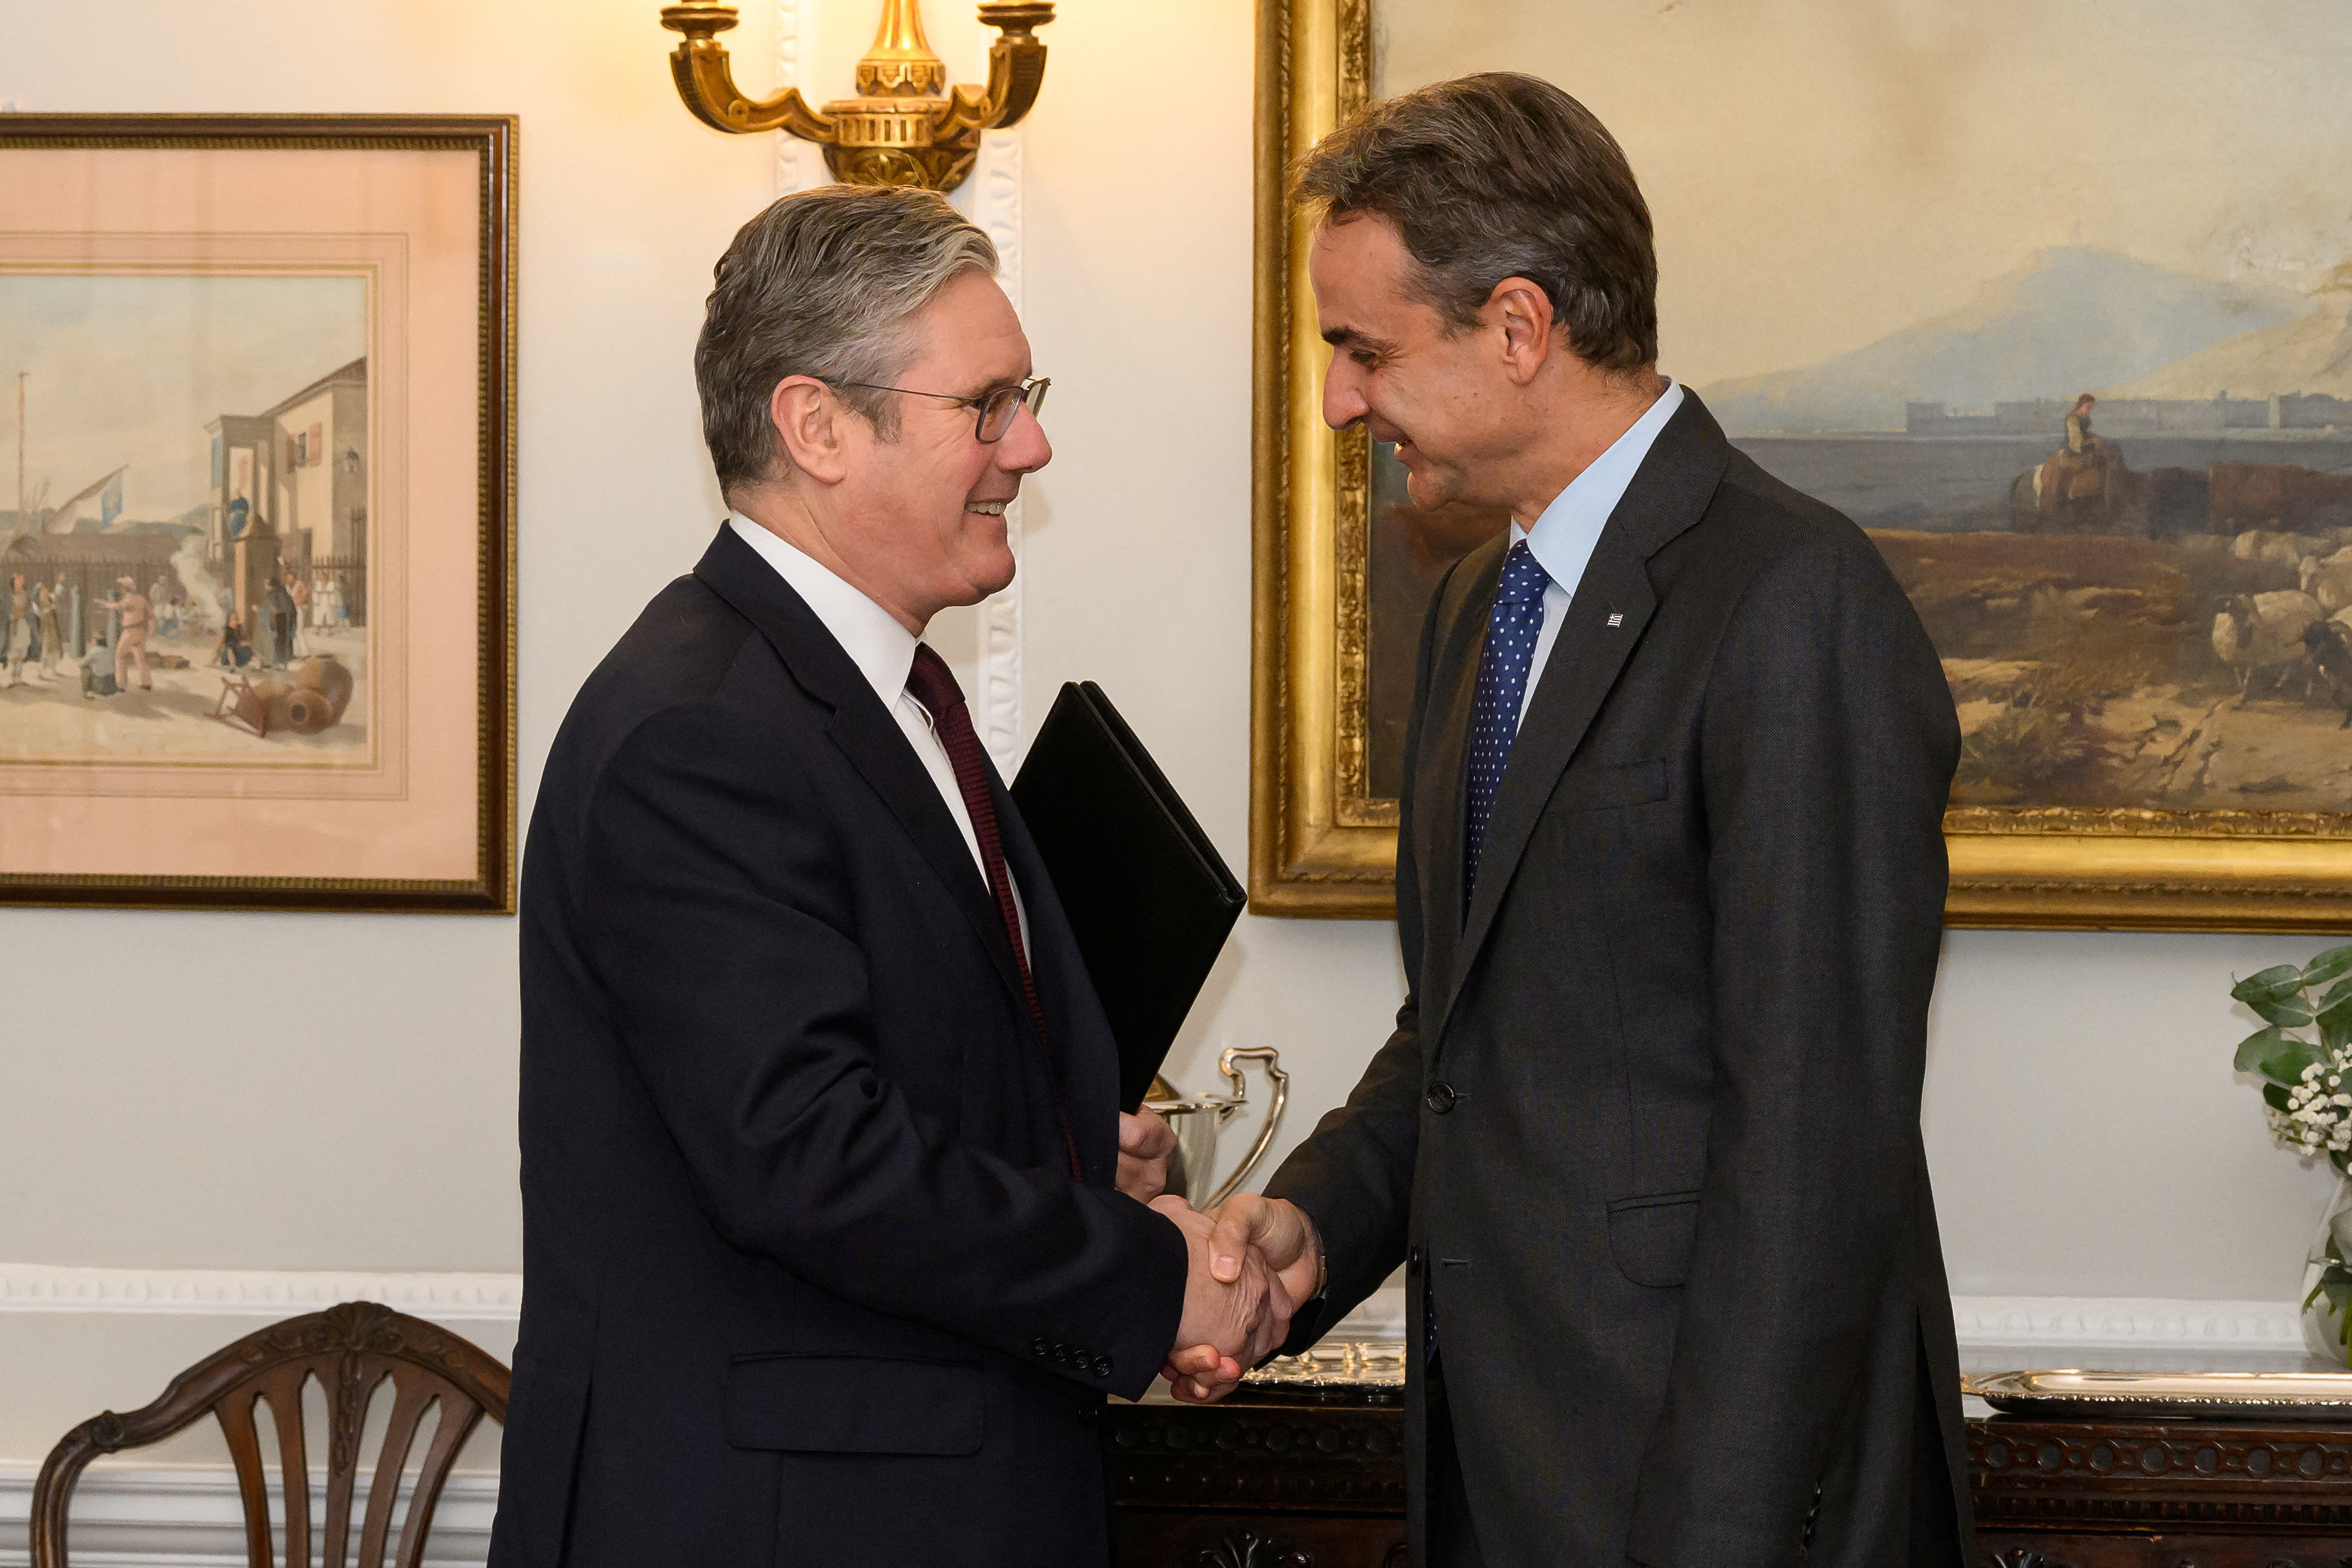 Labour leader Keir Starmer met Mitsotakis on Tuesday and accused Sunak of needlessly becoming embroiled in a conflict with a NATO ally rather than discussing pressing global issues such as the economy and immigration./Reuters/Leon Neal.